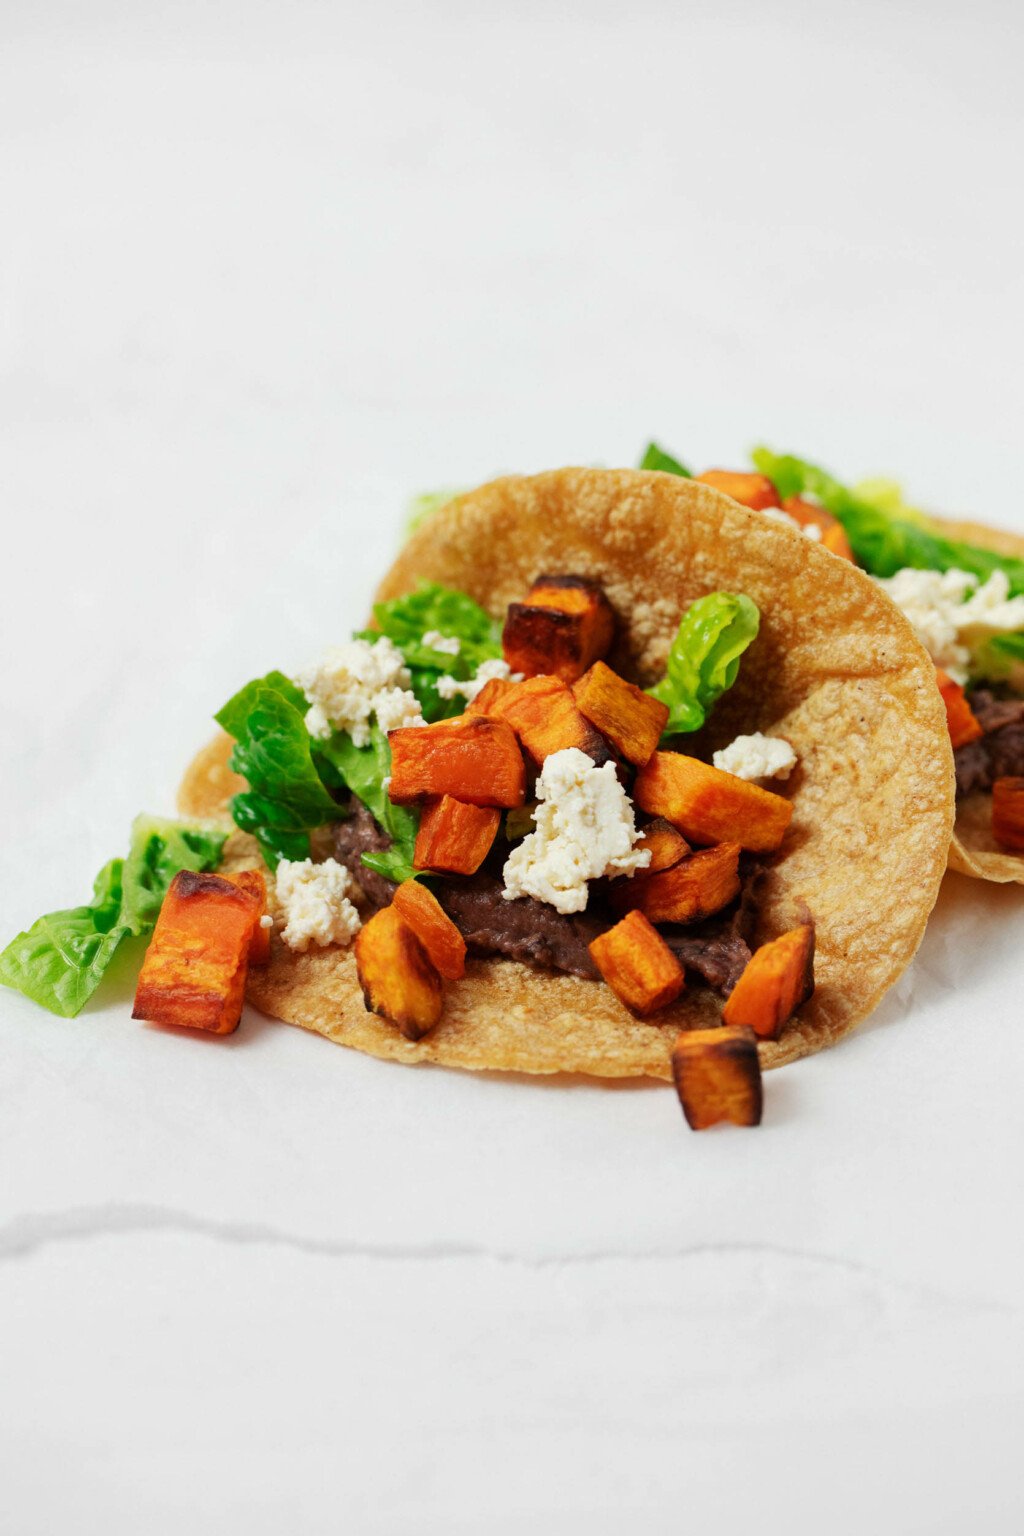 Two tacos, prepared with plant based ingredients, have been laid out on a white sheet of parchment paper.